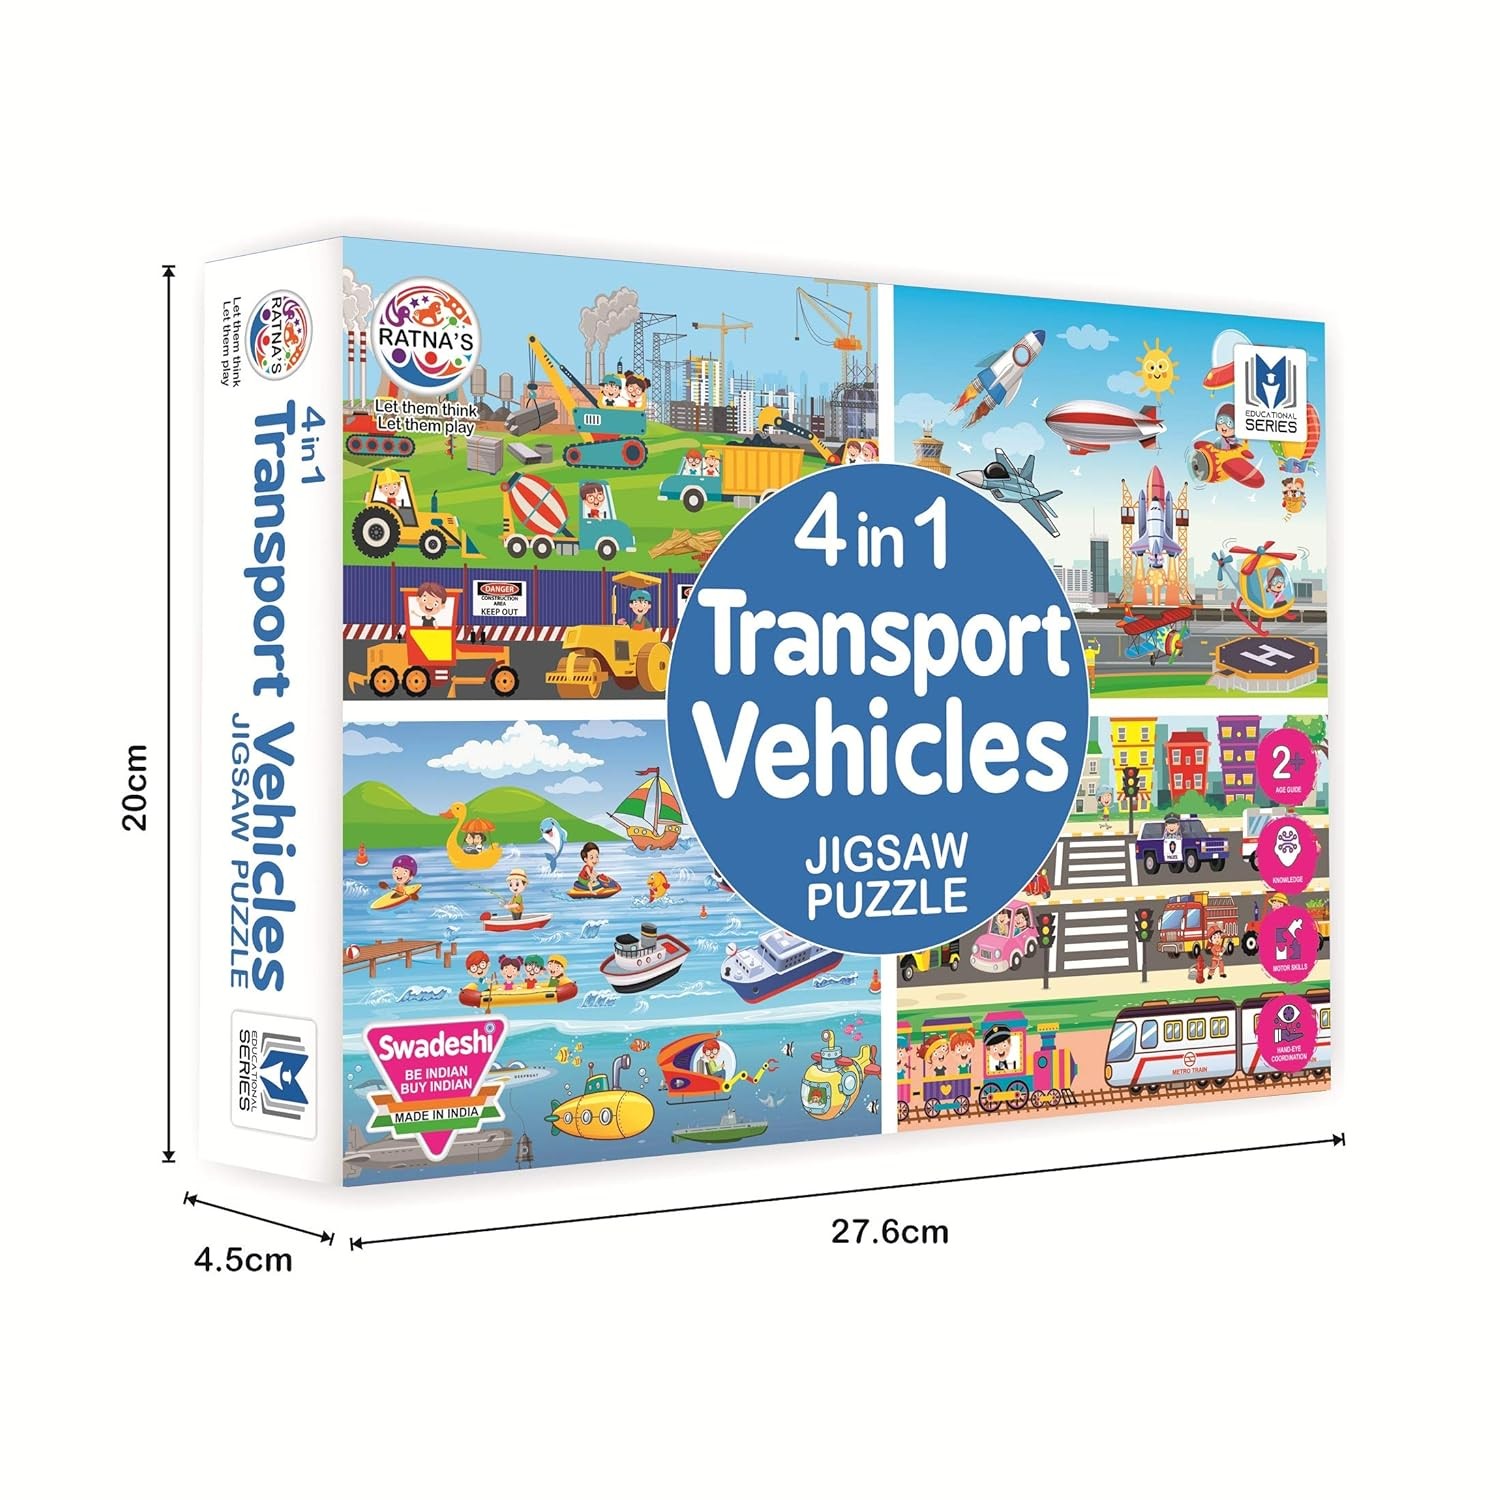 Ratna's 4 in 1 Transport Vehicles Jigsaw Puzzle for Kids. 4 Puzzles 35 Pieces Each (Road Transport, Water Transport, Air Transport & Construction Vehicles)